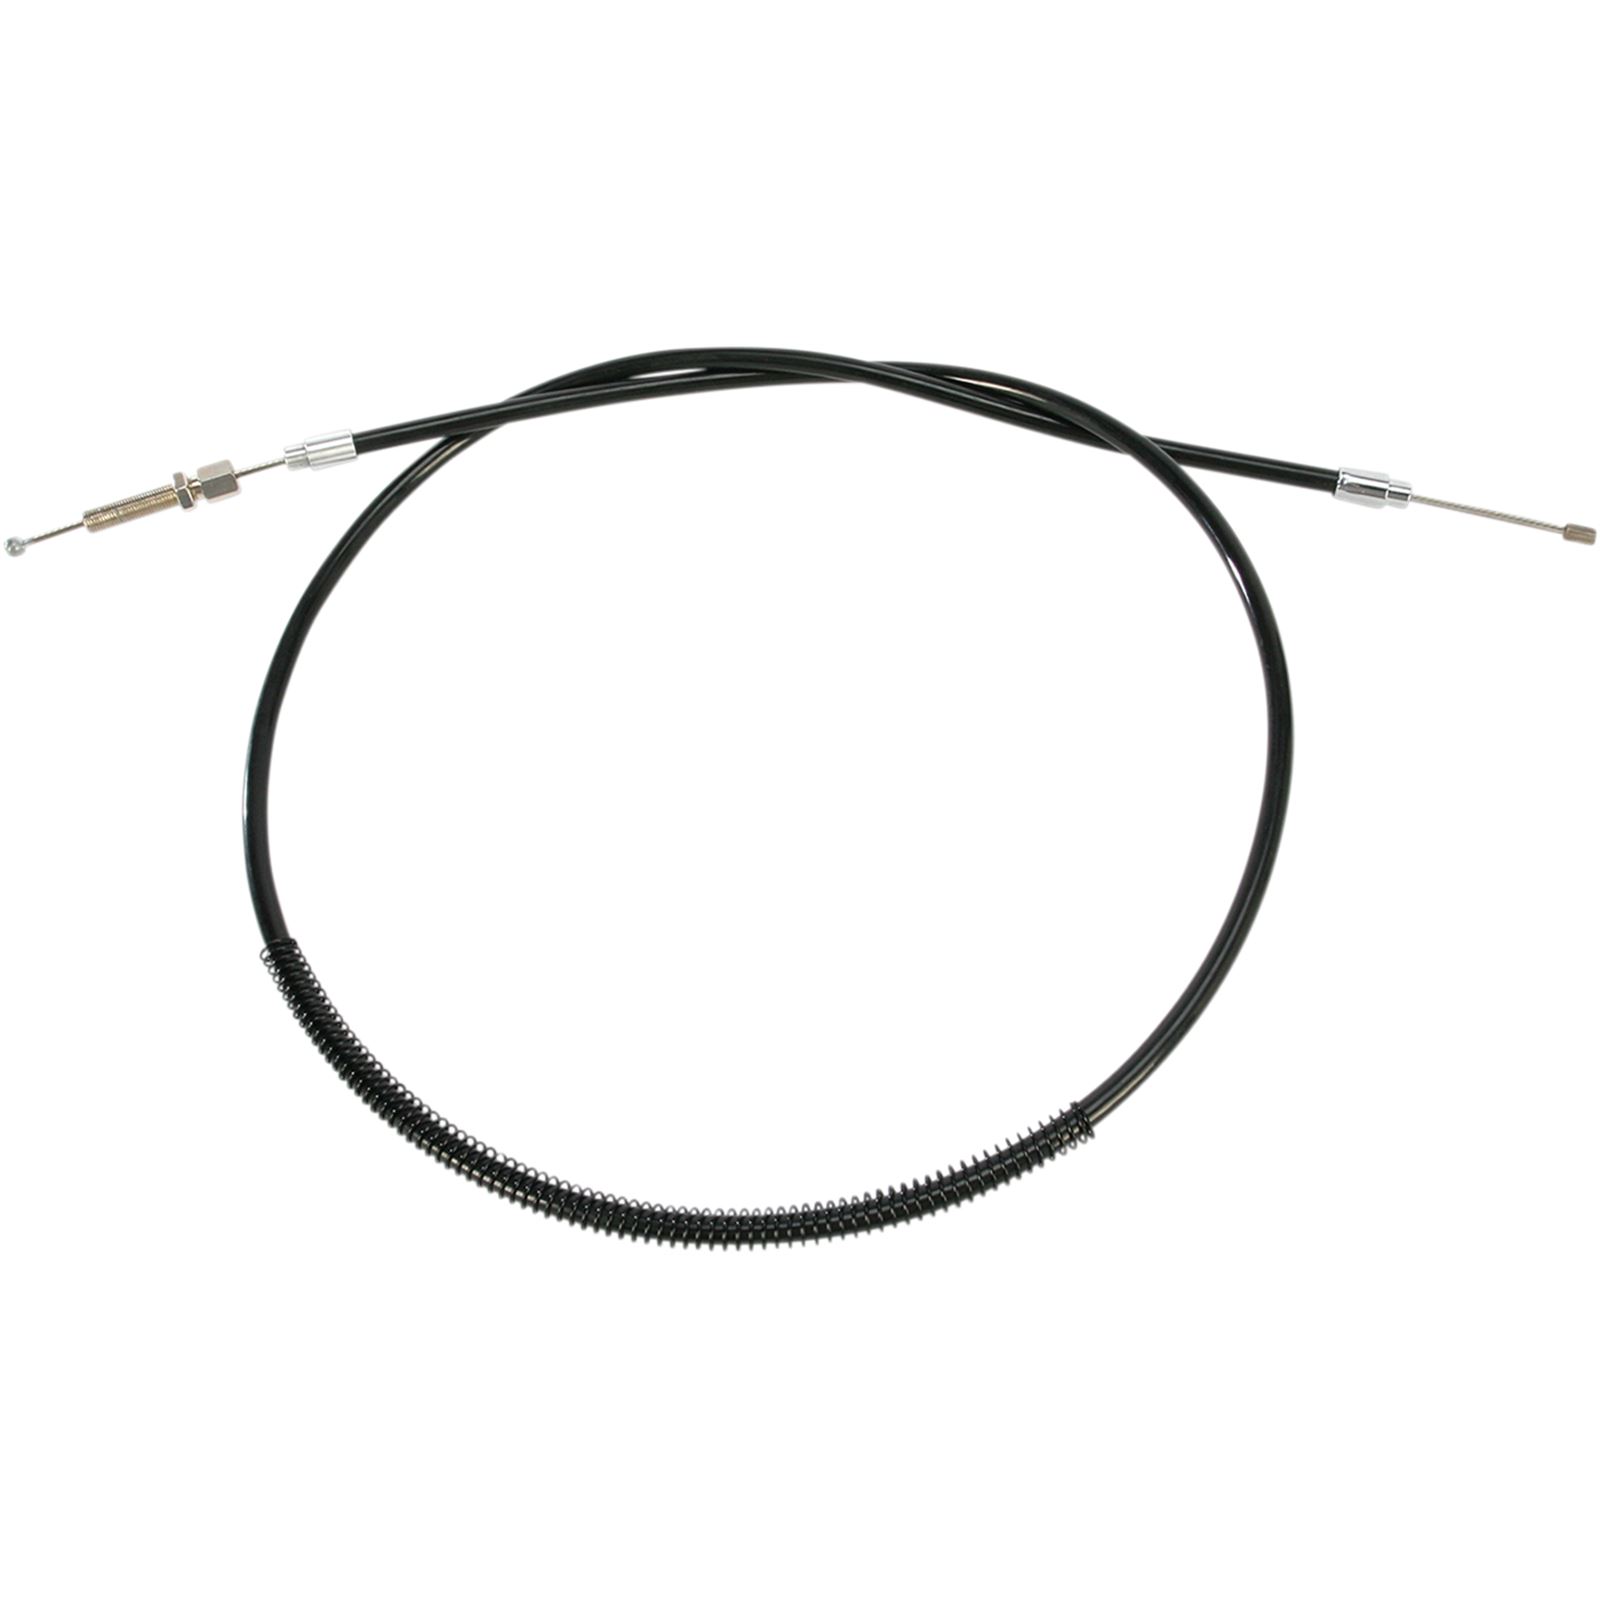 Barnett Performance Extended 6" Clutch Cable